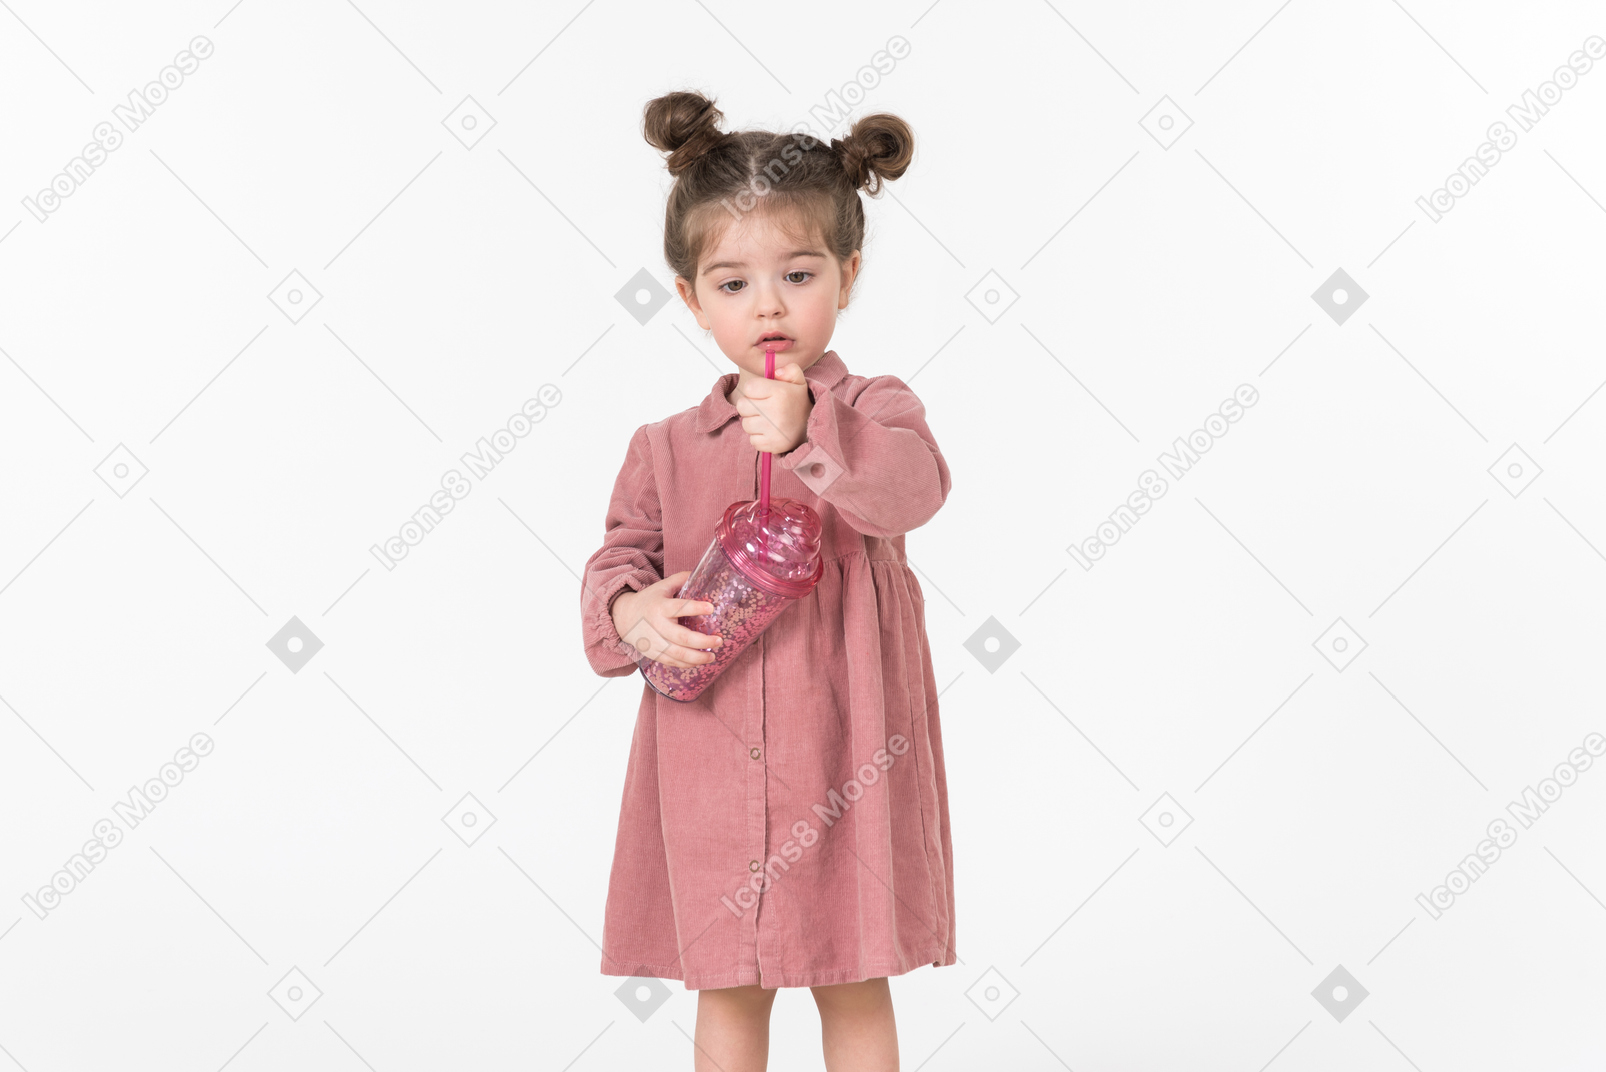 Little kid girl holding pink plastic cup and straw